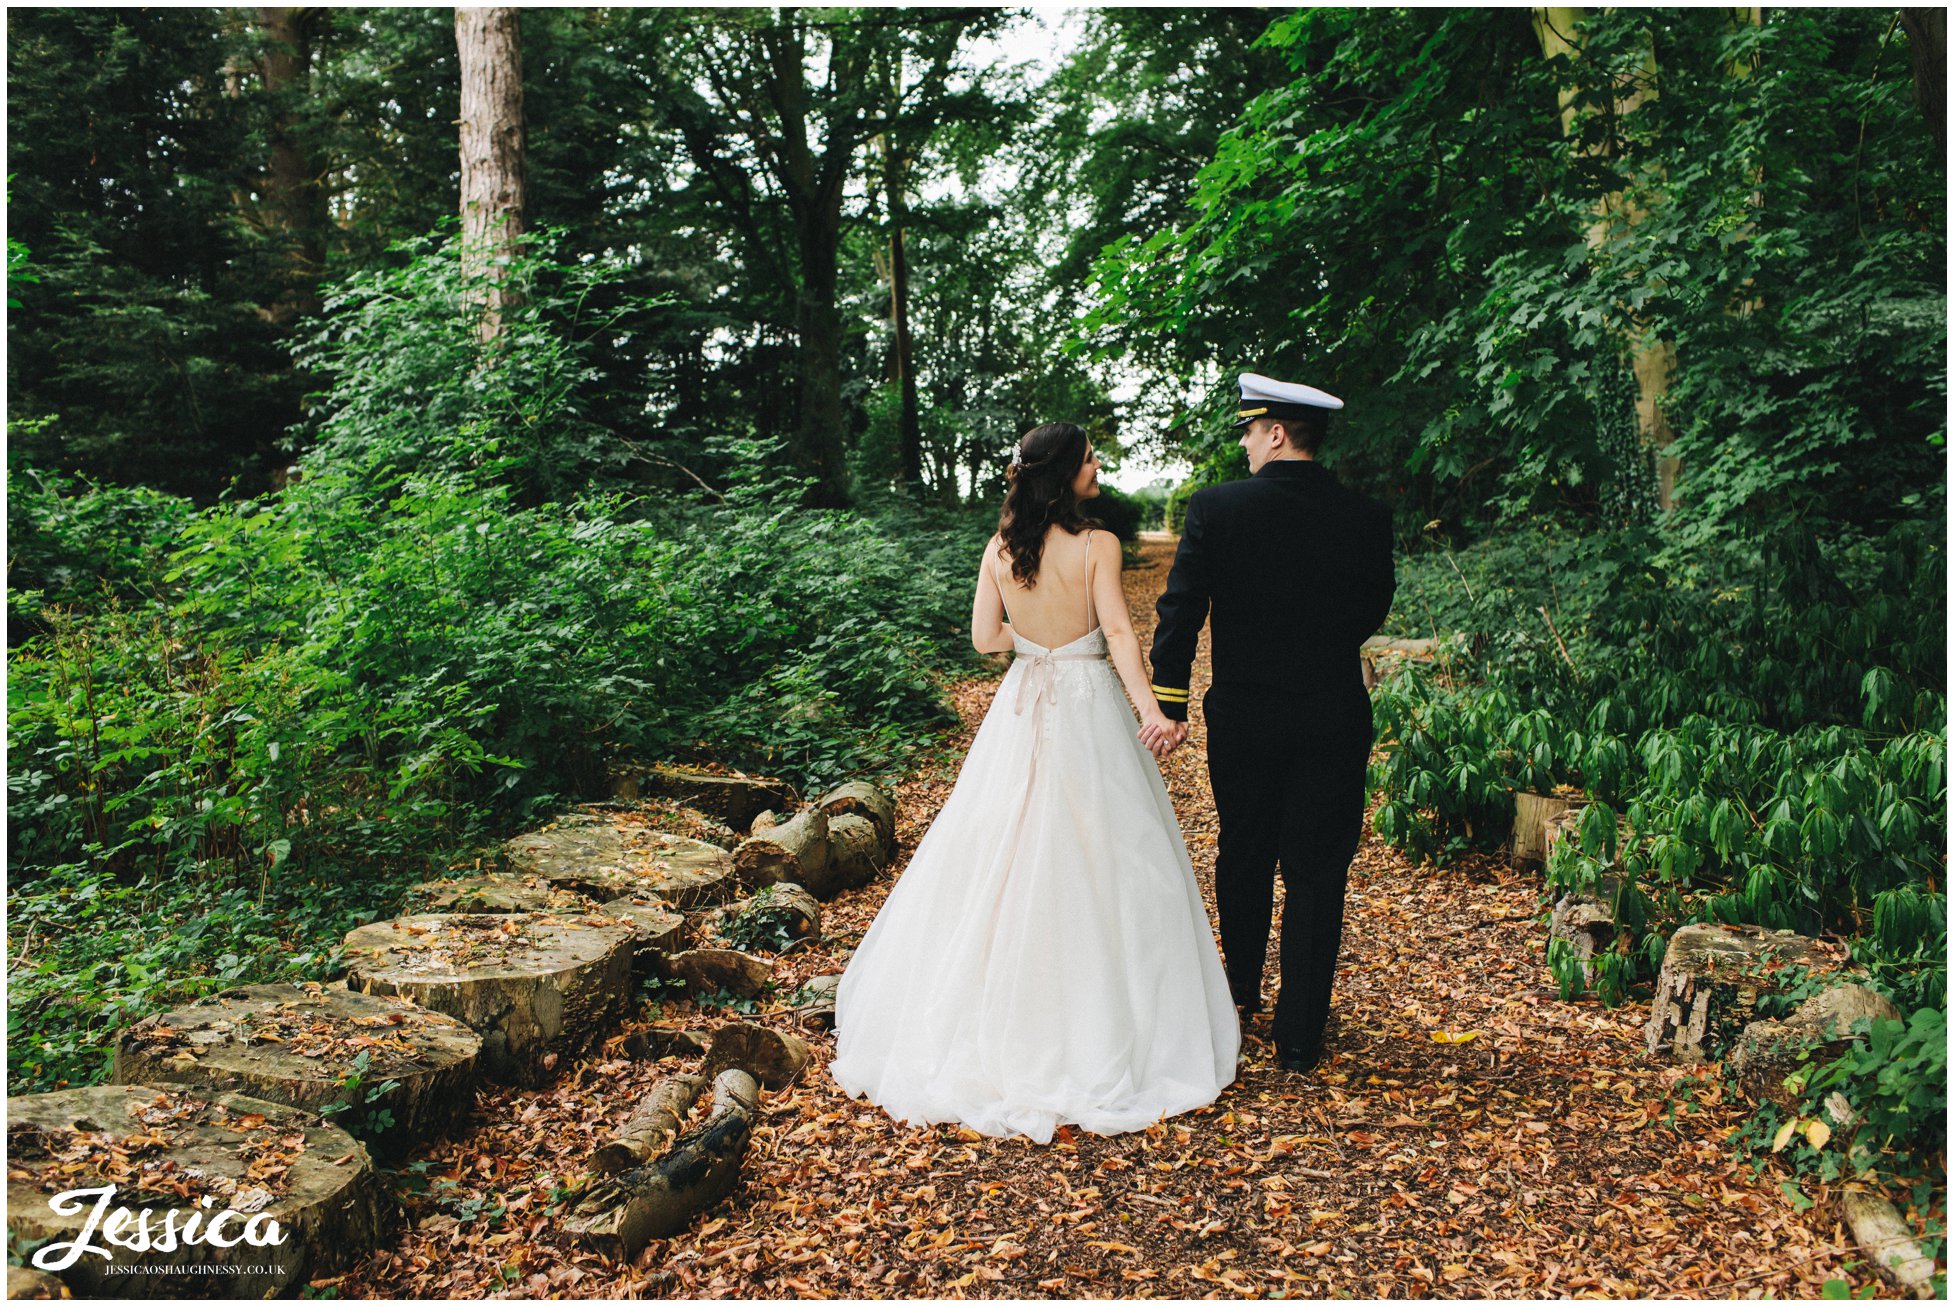 the new husband and wife hold hands walking through the forest